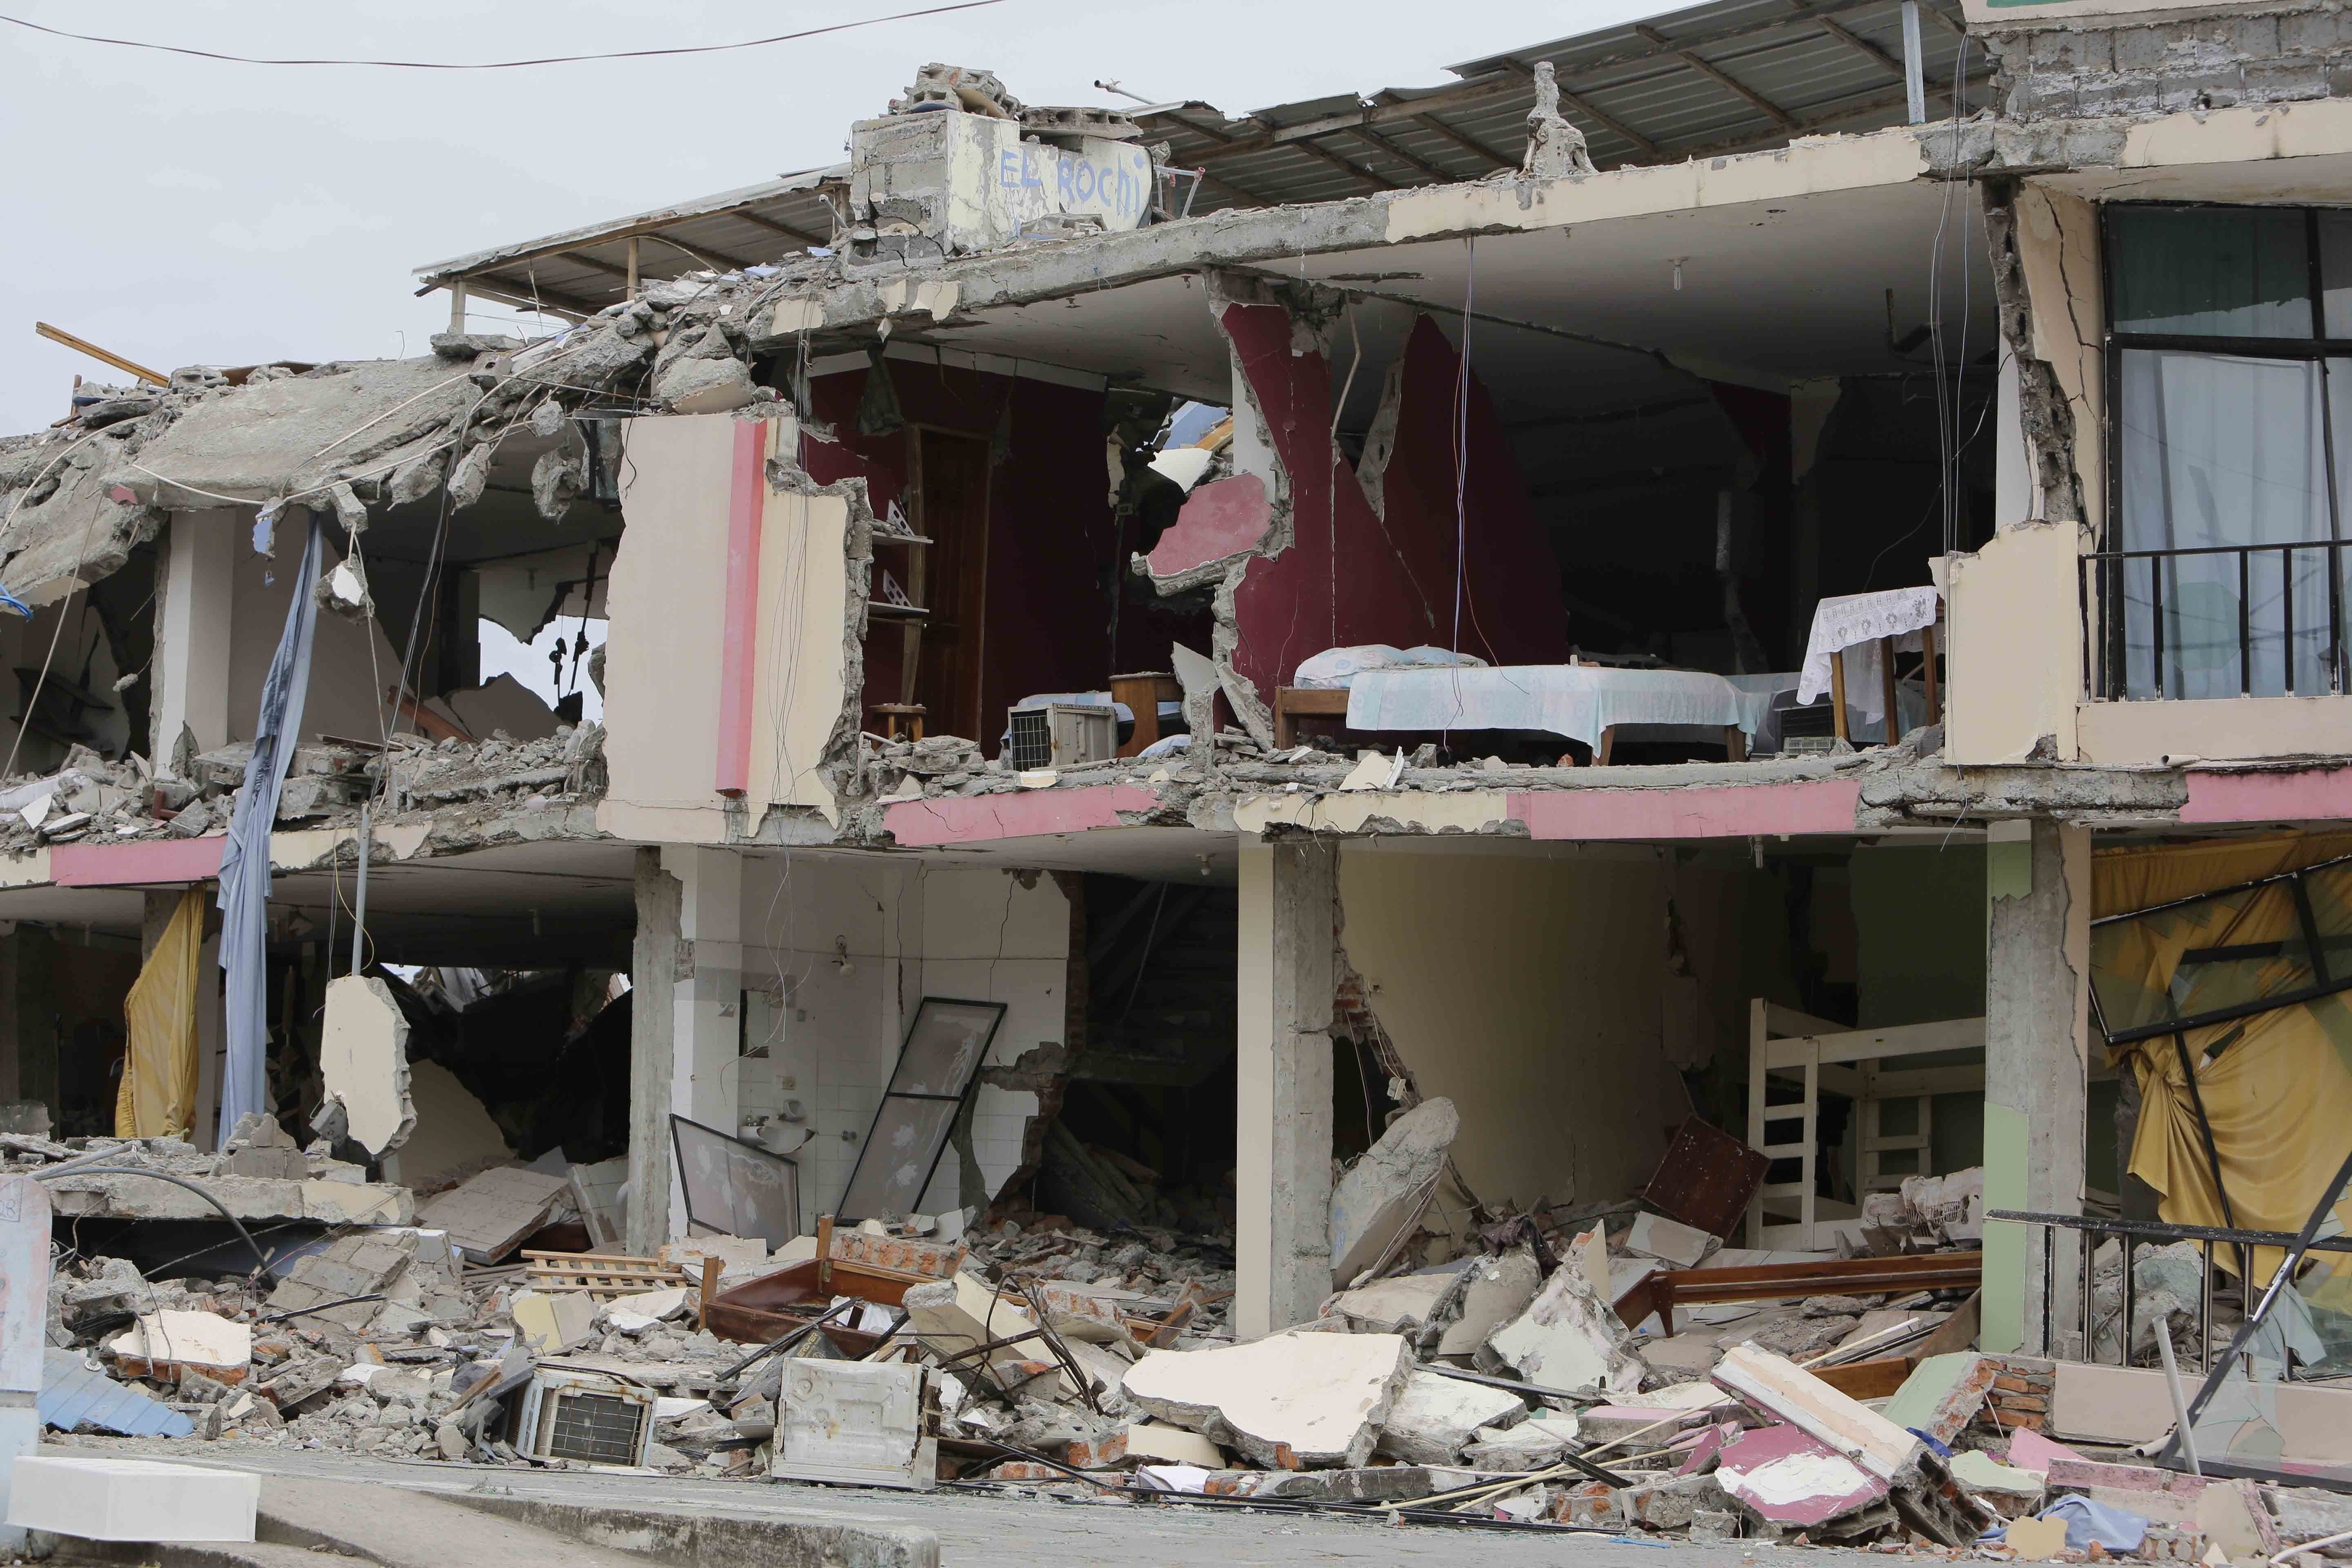 A building destroyed by an earthquake in Pedernales, Ecuador, in April 2016.